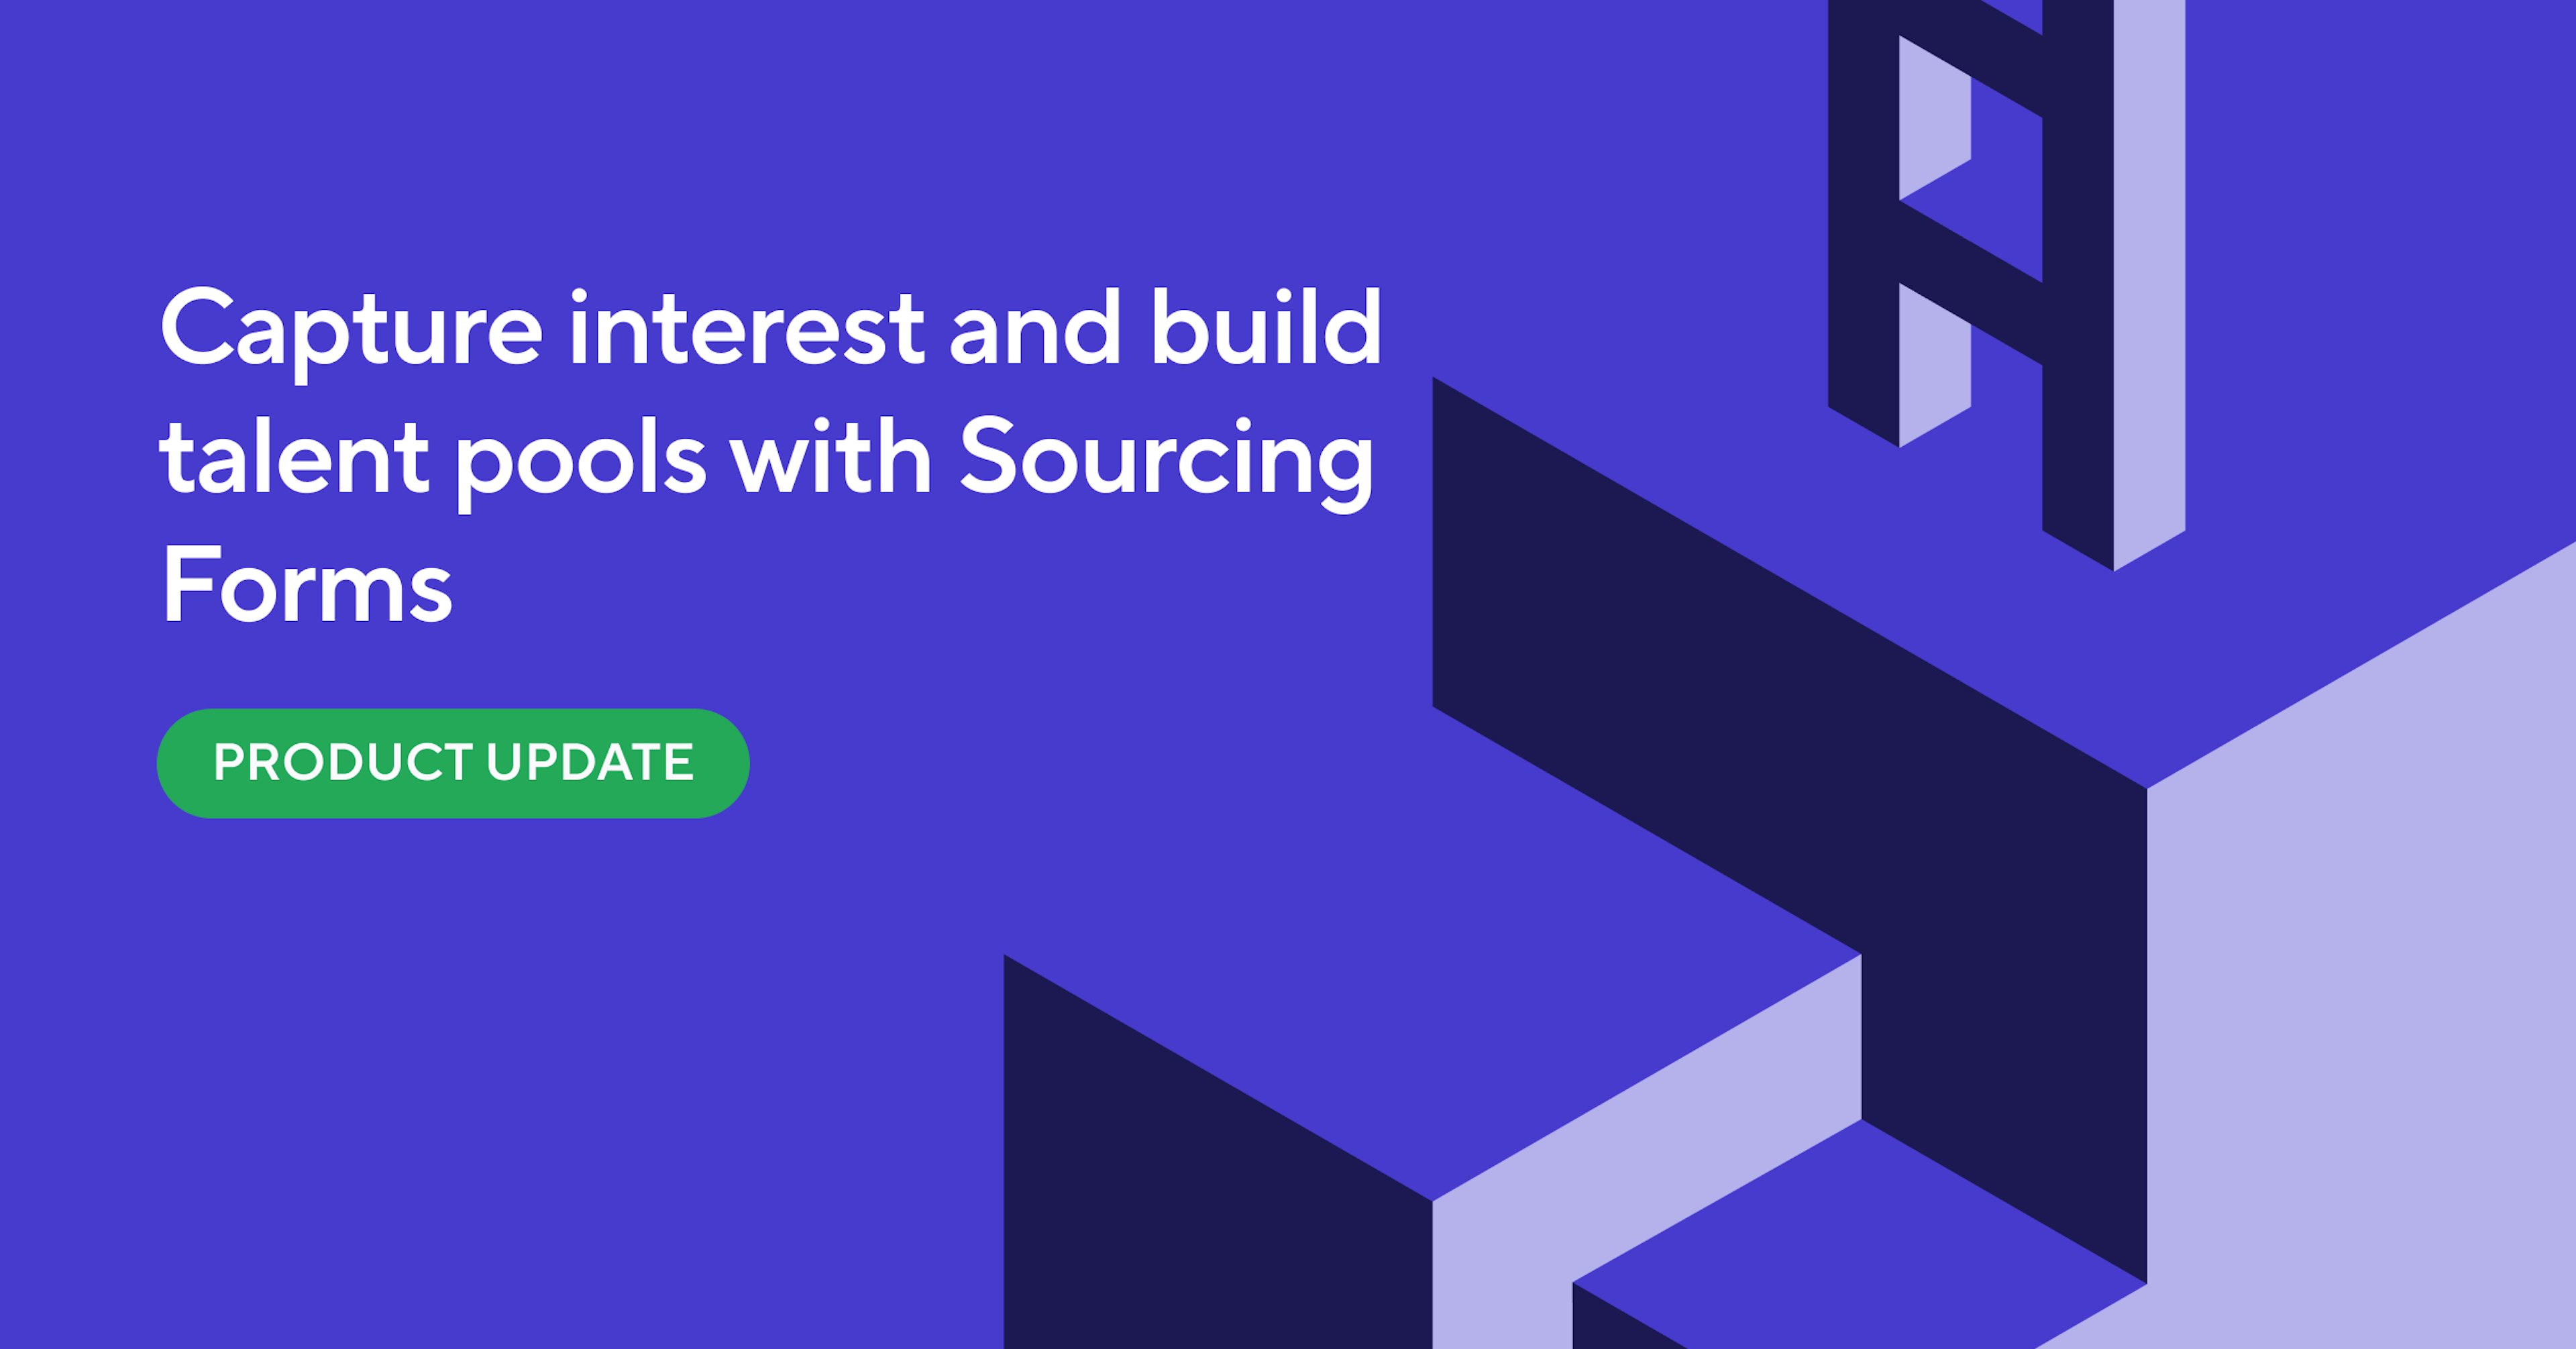 New Feature: Build Talent Pools and Capture Interest with Sourcing Forms